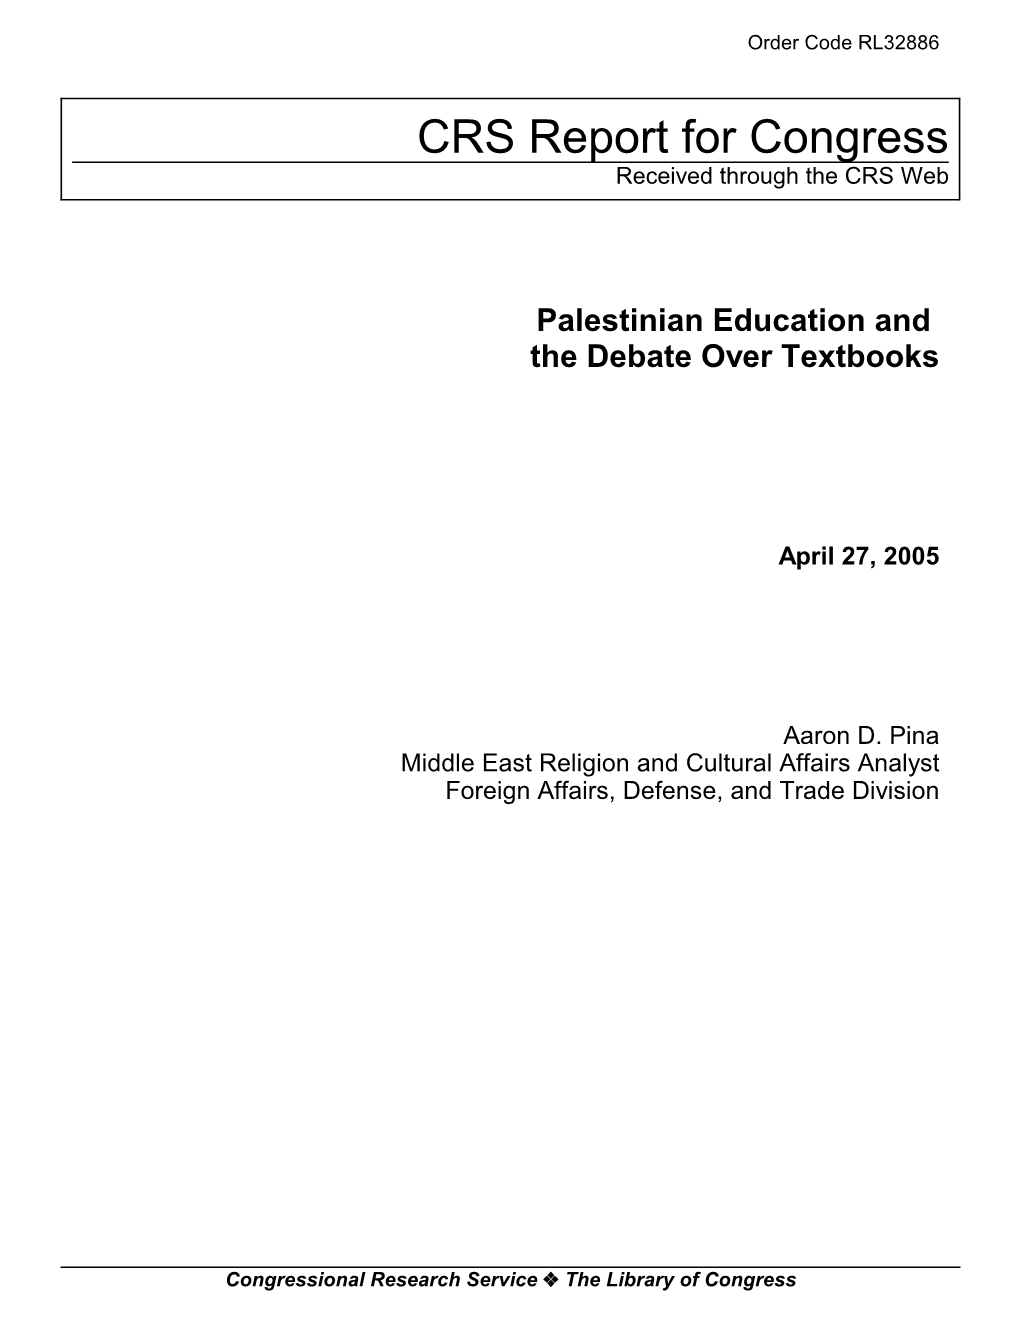 Palestinian Education and the Debate Over Textbooks